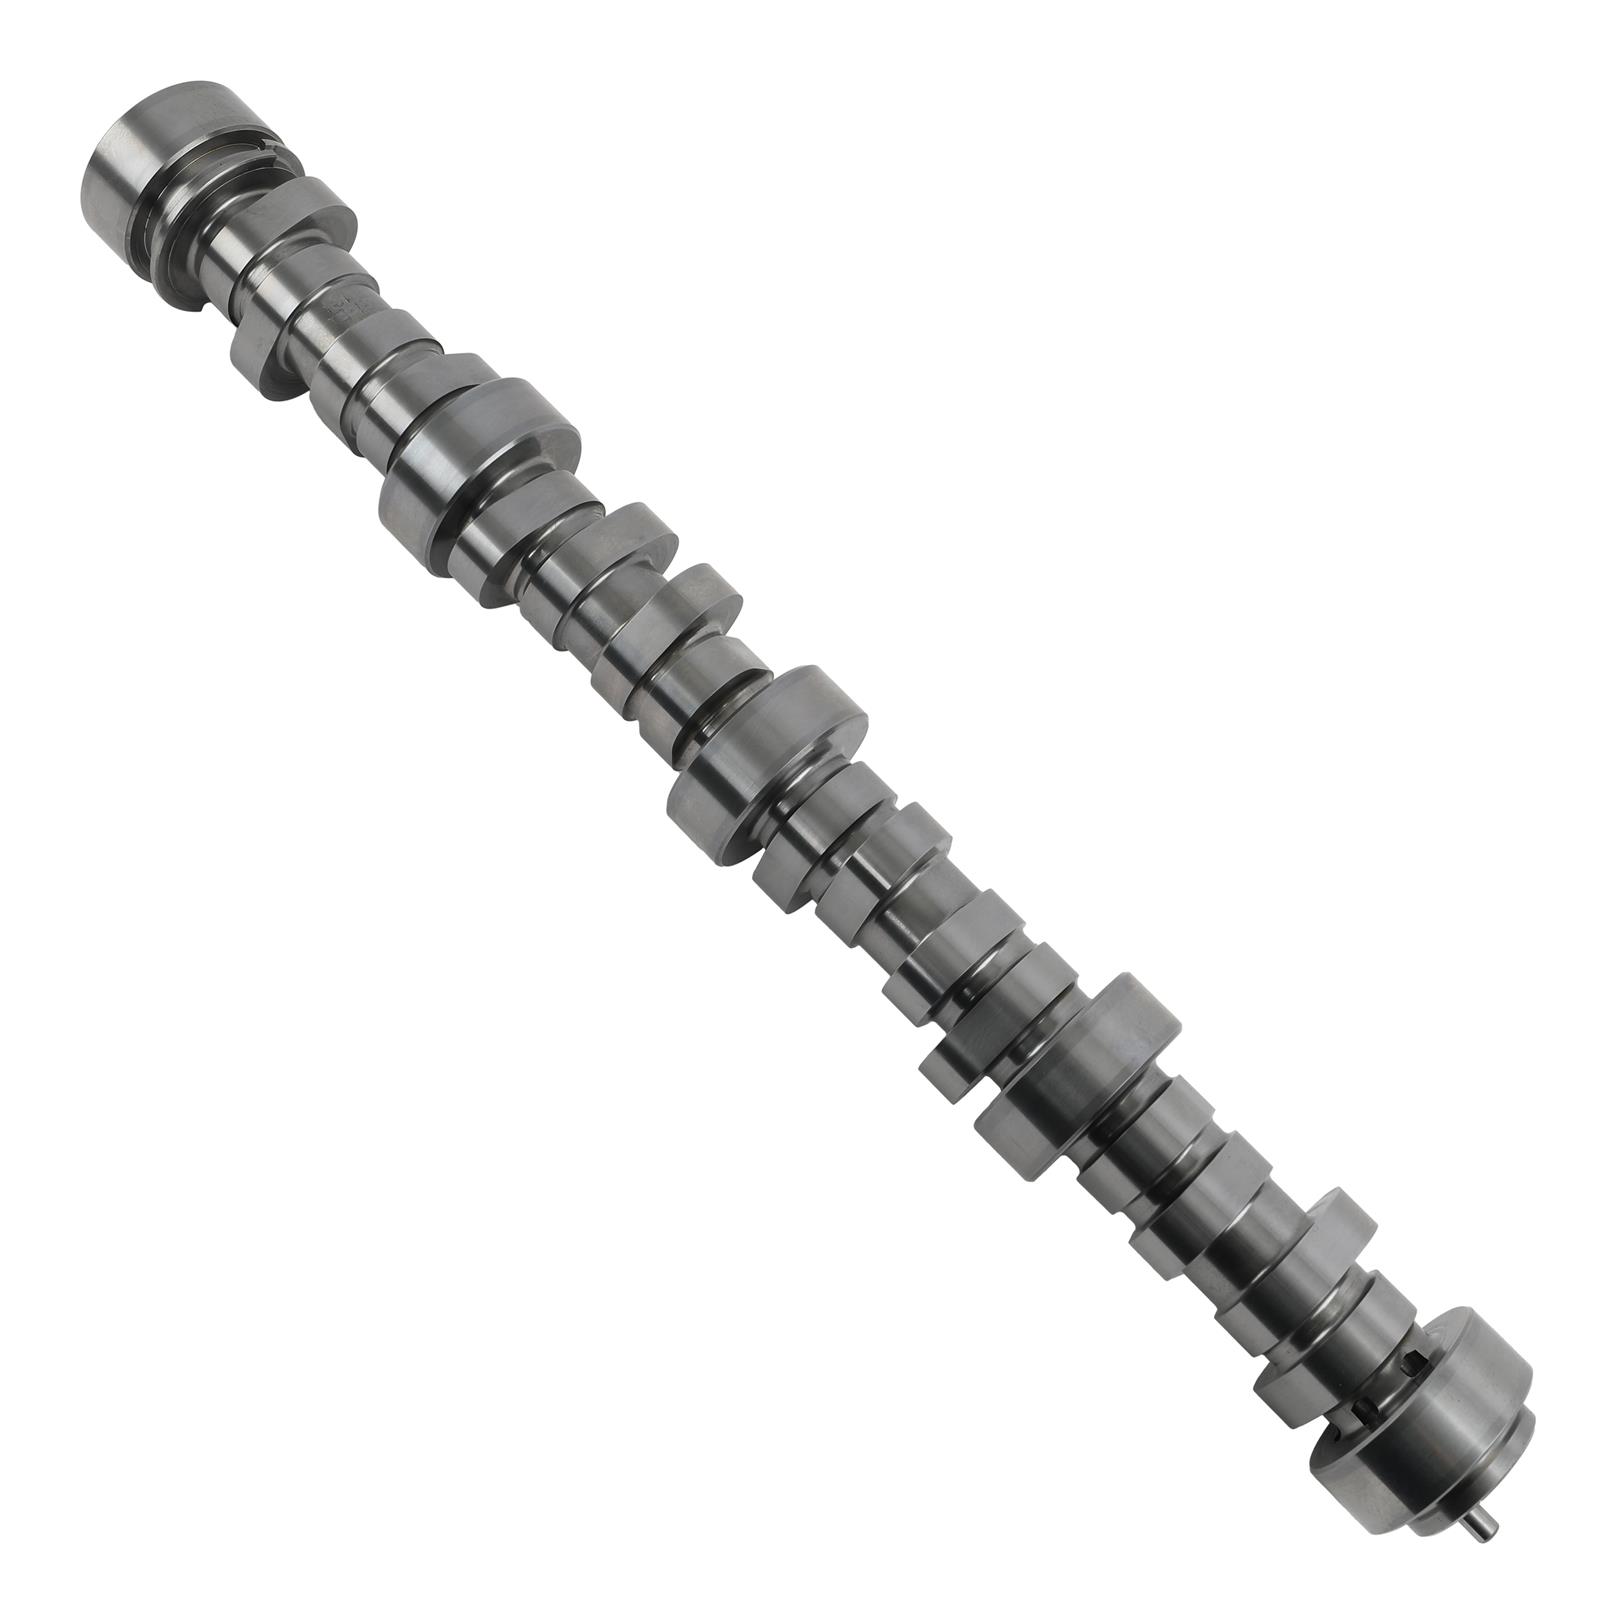 COMP Cams 54-448-11 COMP Cams XFI XE-R Camshafts | Summit Racing